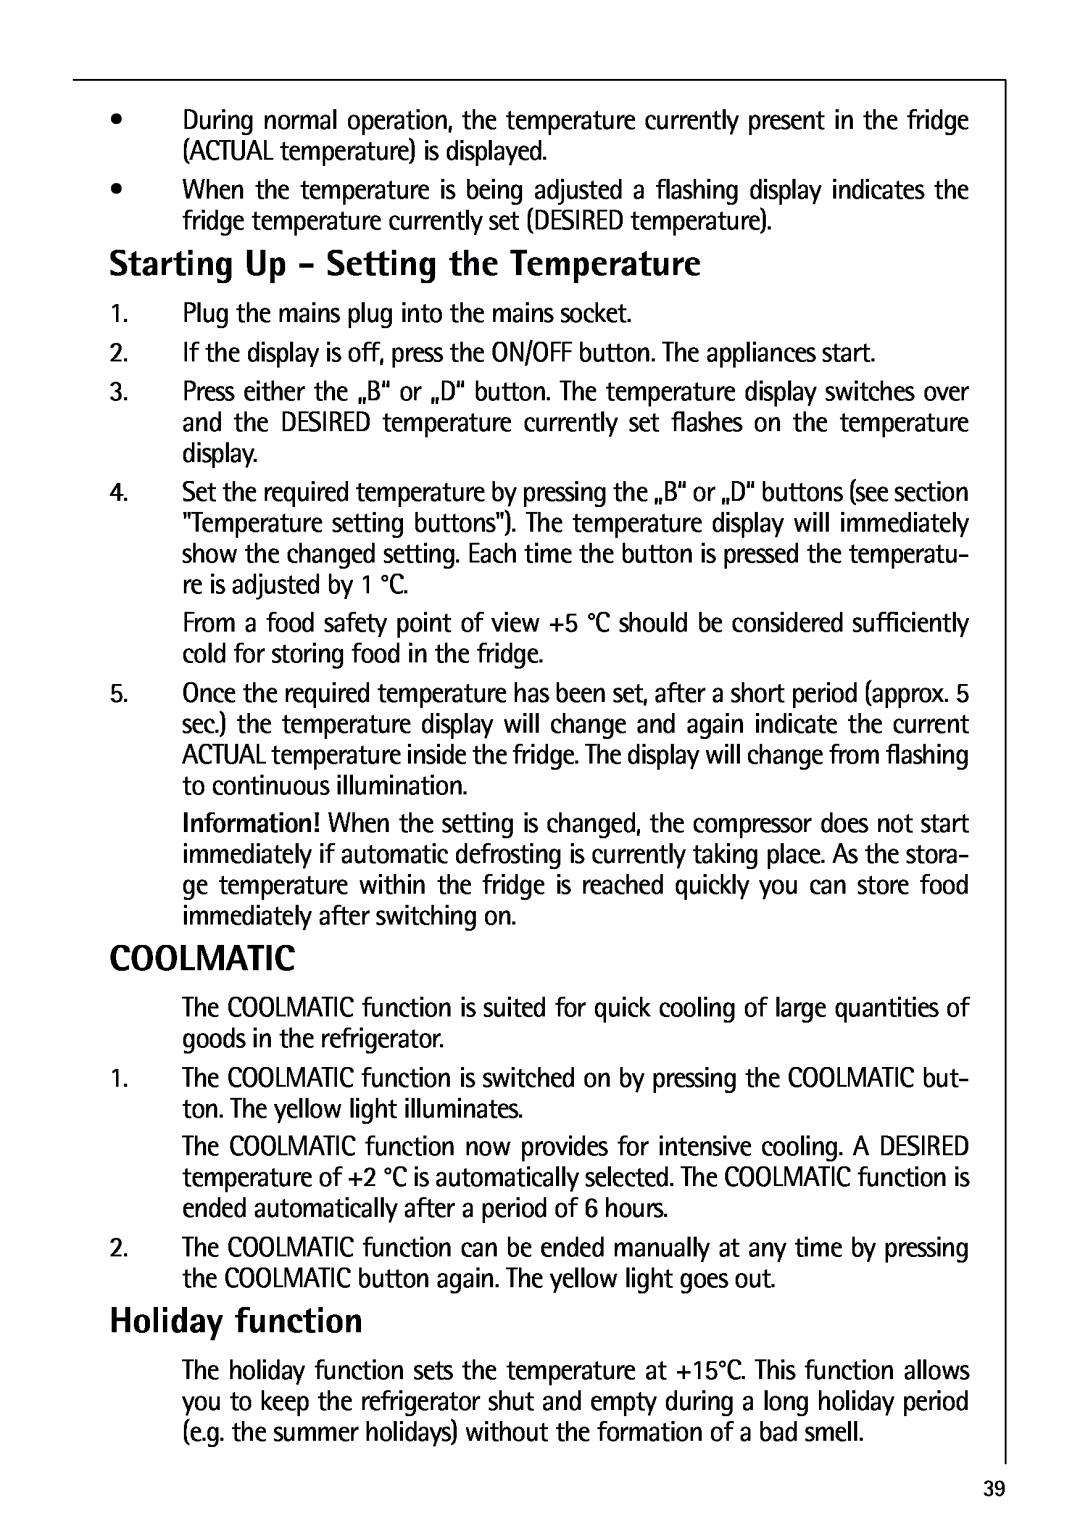 AEG 80318-5 KG user manual Starting Up - Setting the Temperature, Coolmatic, Holiday function 